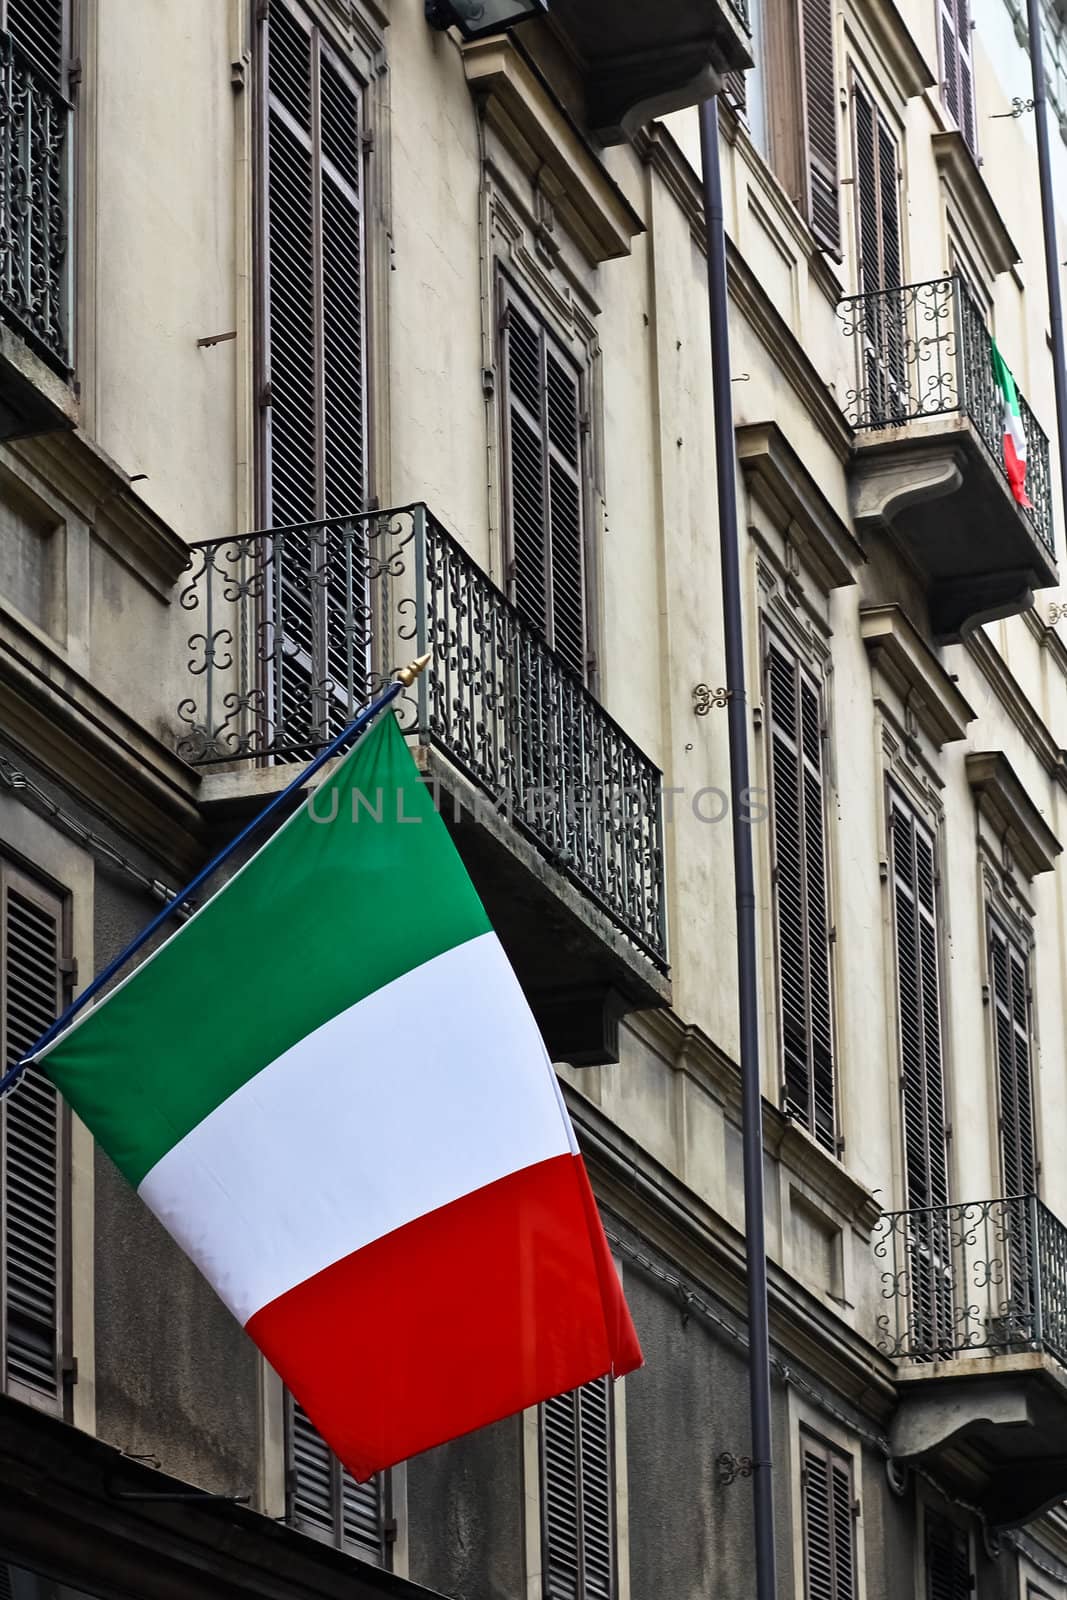 Italian flags on a building celebrating a local anniversary in Torino, Italy